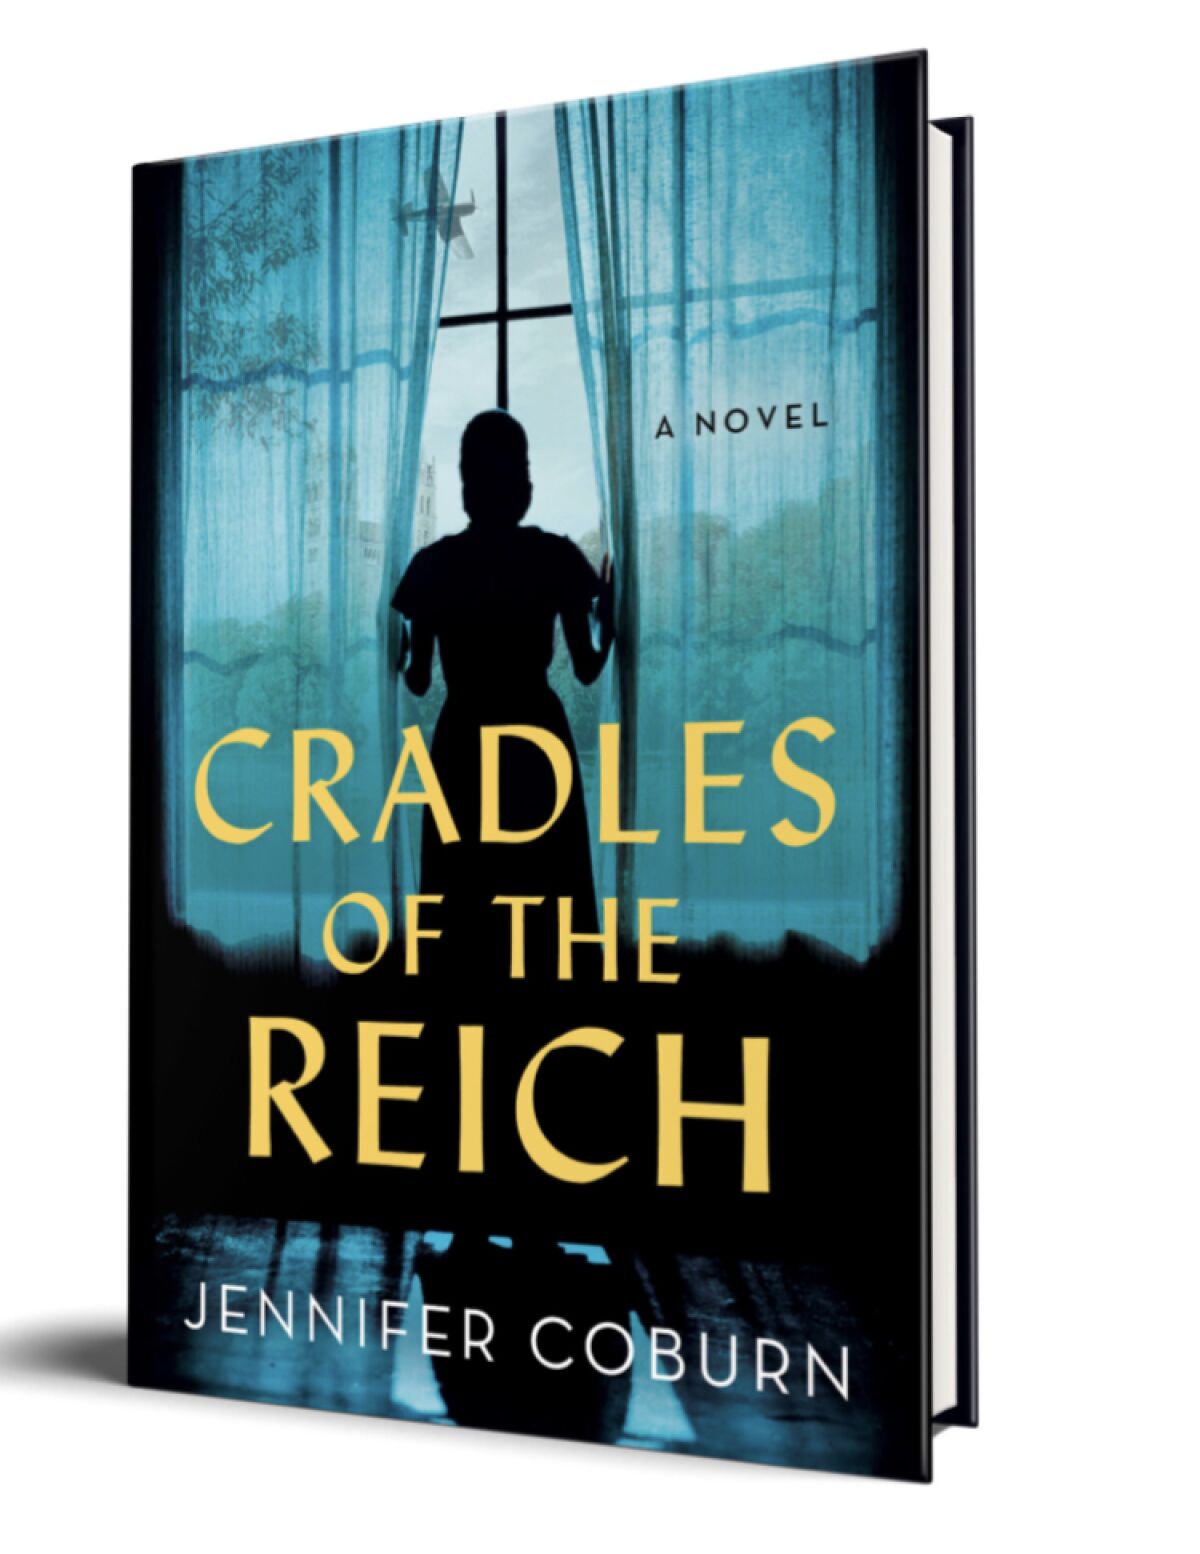 The cover of “Cradles of the Reich’